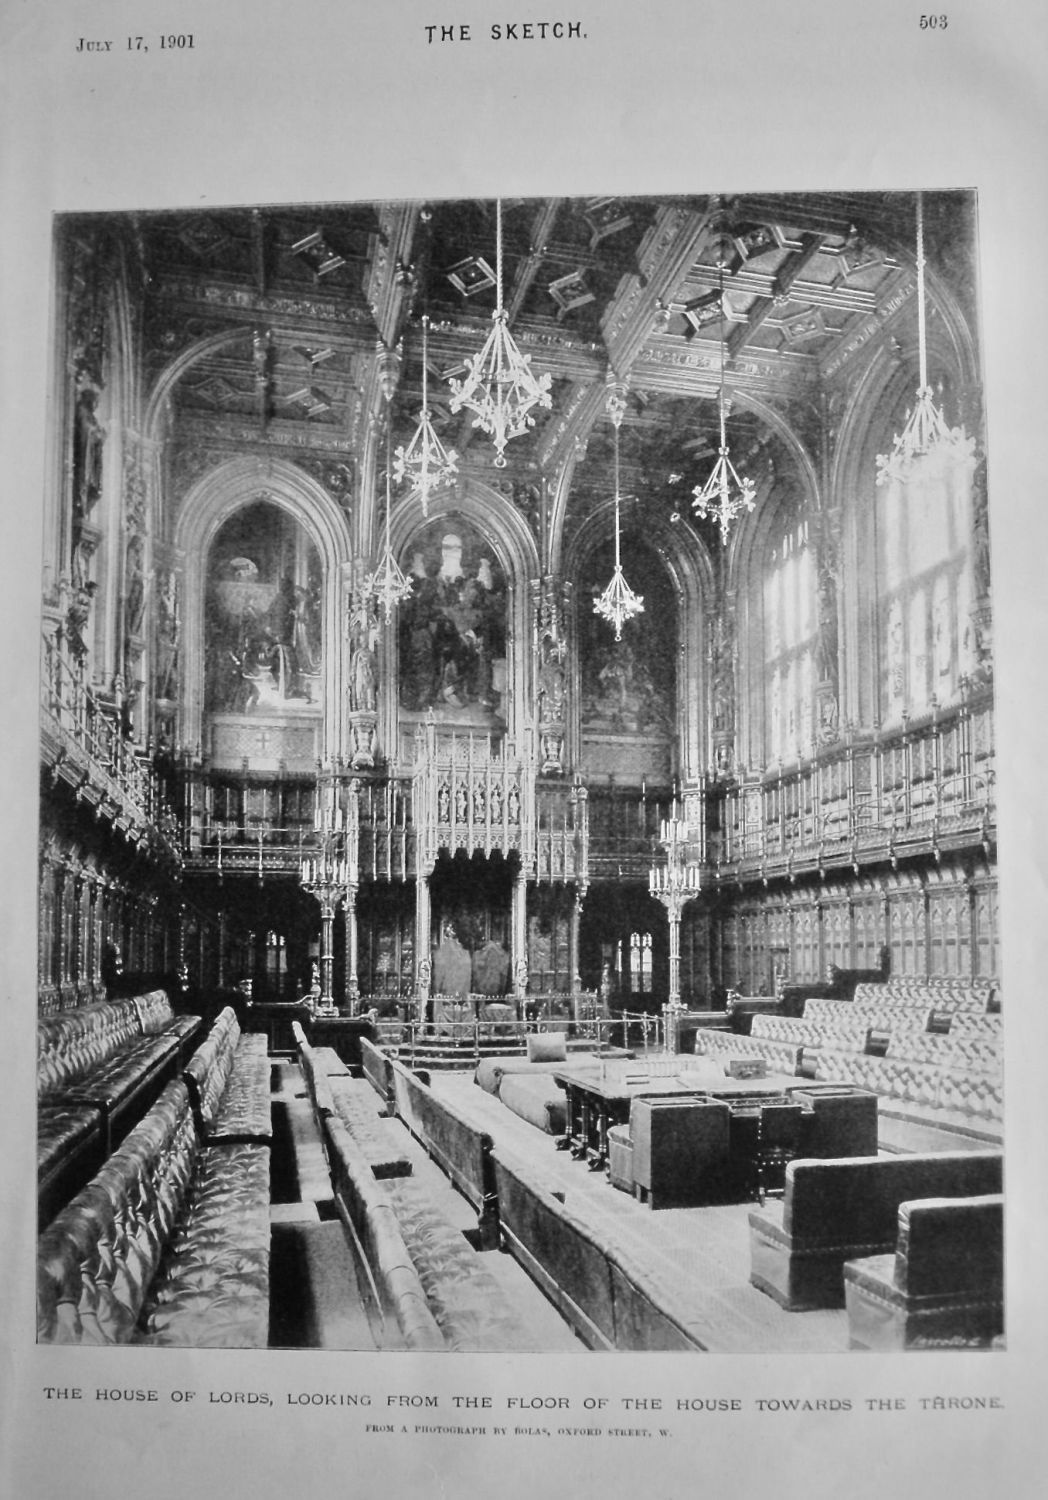 The House of Lords, Looking from the Floor of the House towards the Throne.